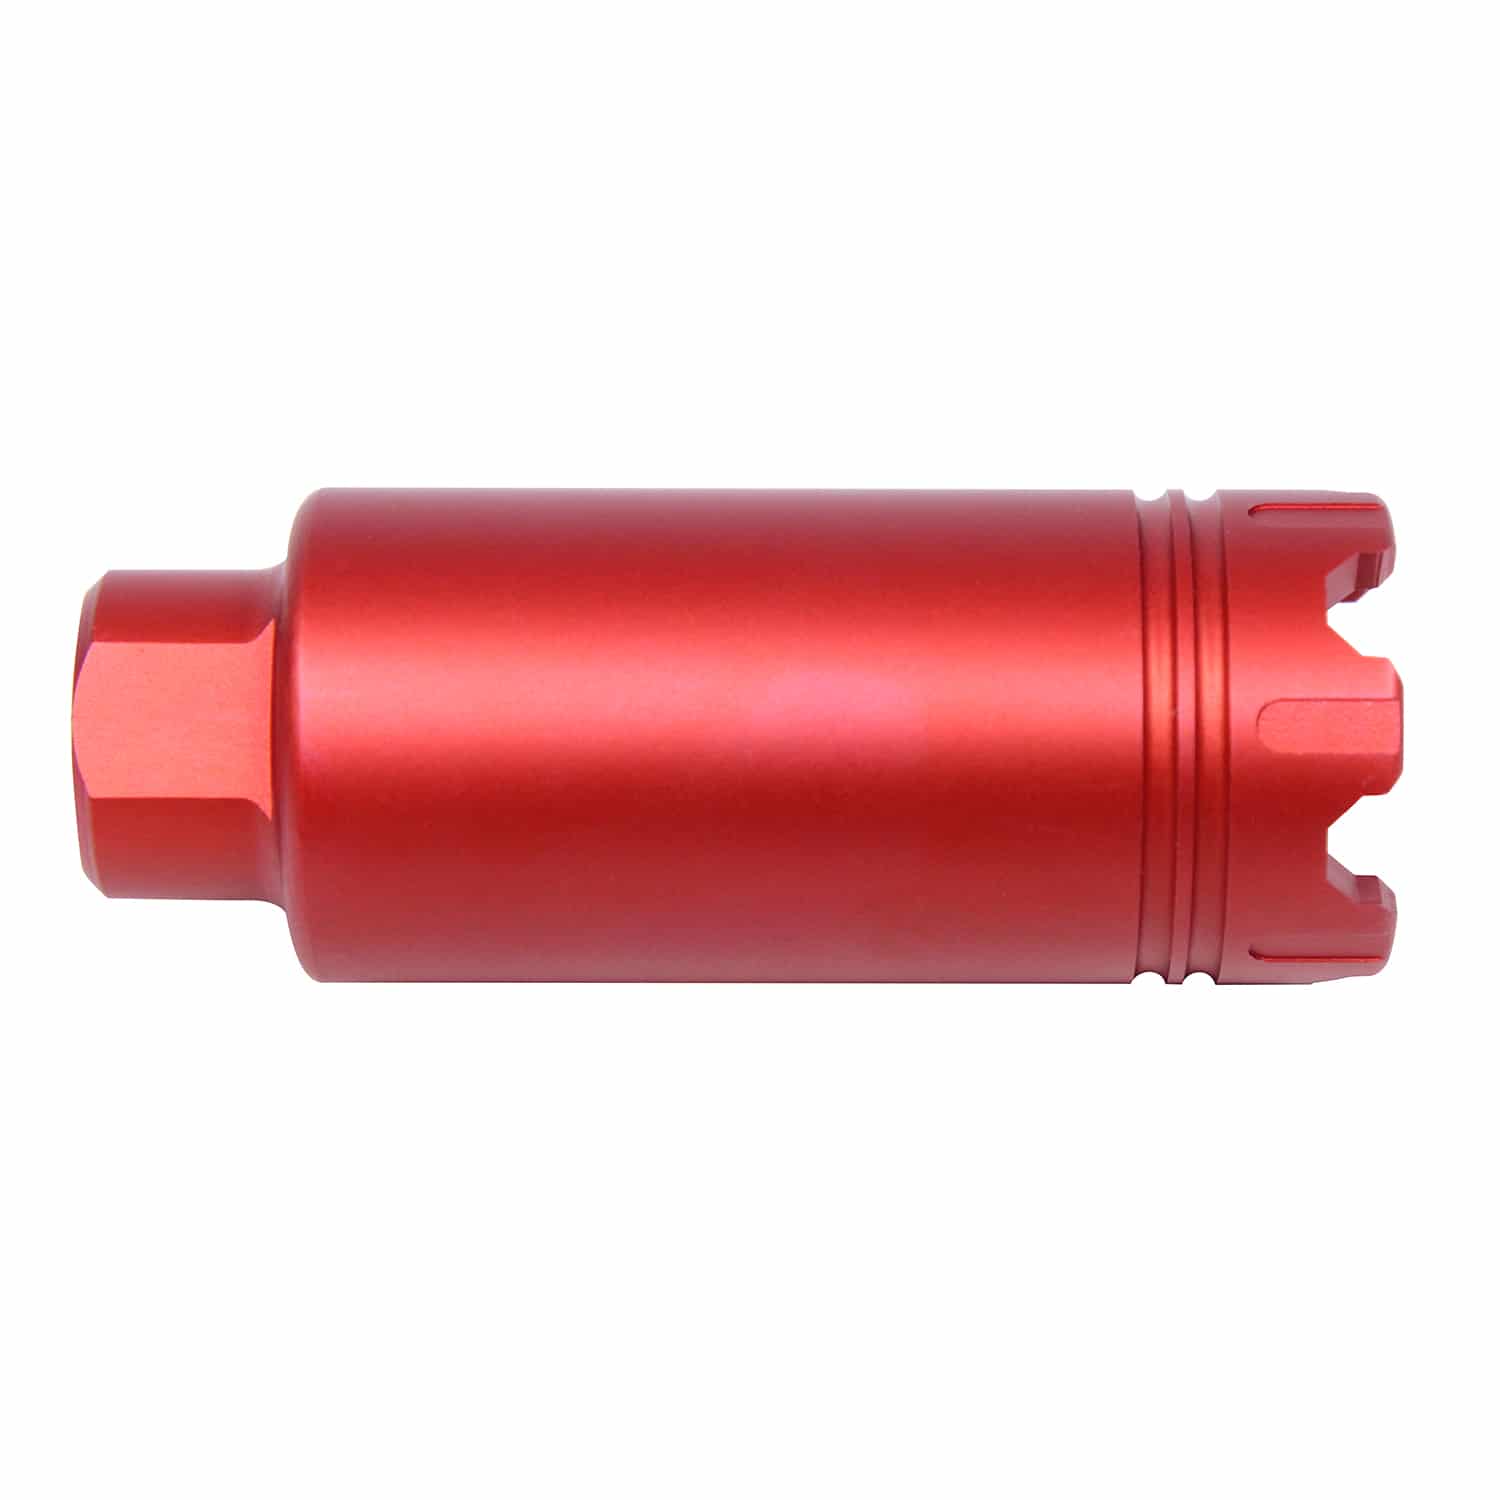 AR-15 Slim Line 'Trident' Flash Can With Glass Breaker (Anodized Red)